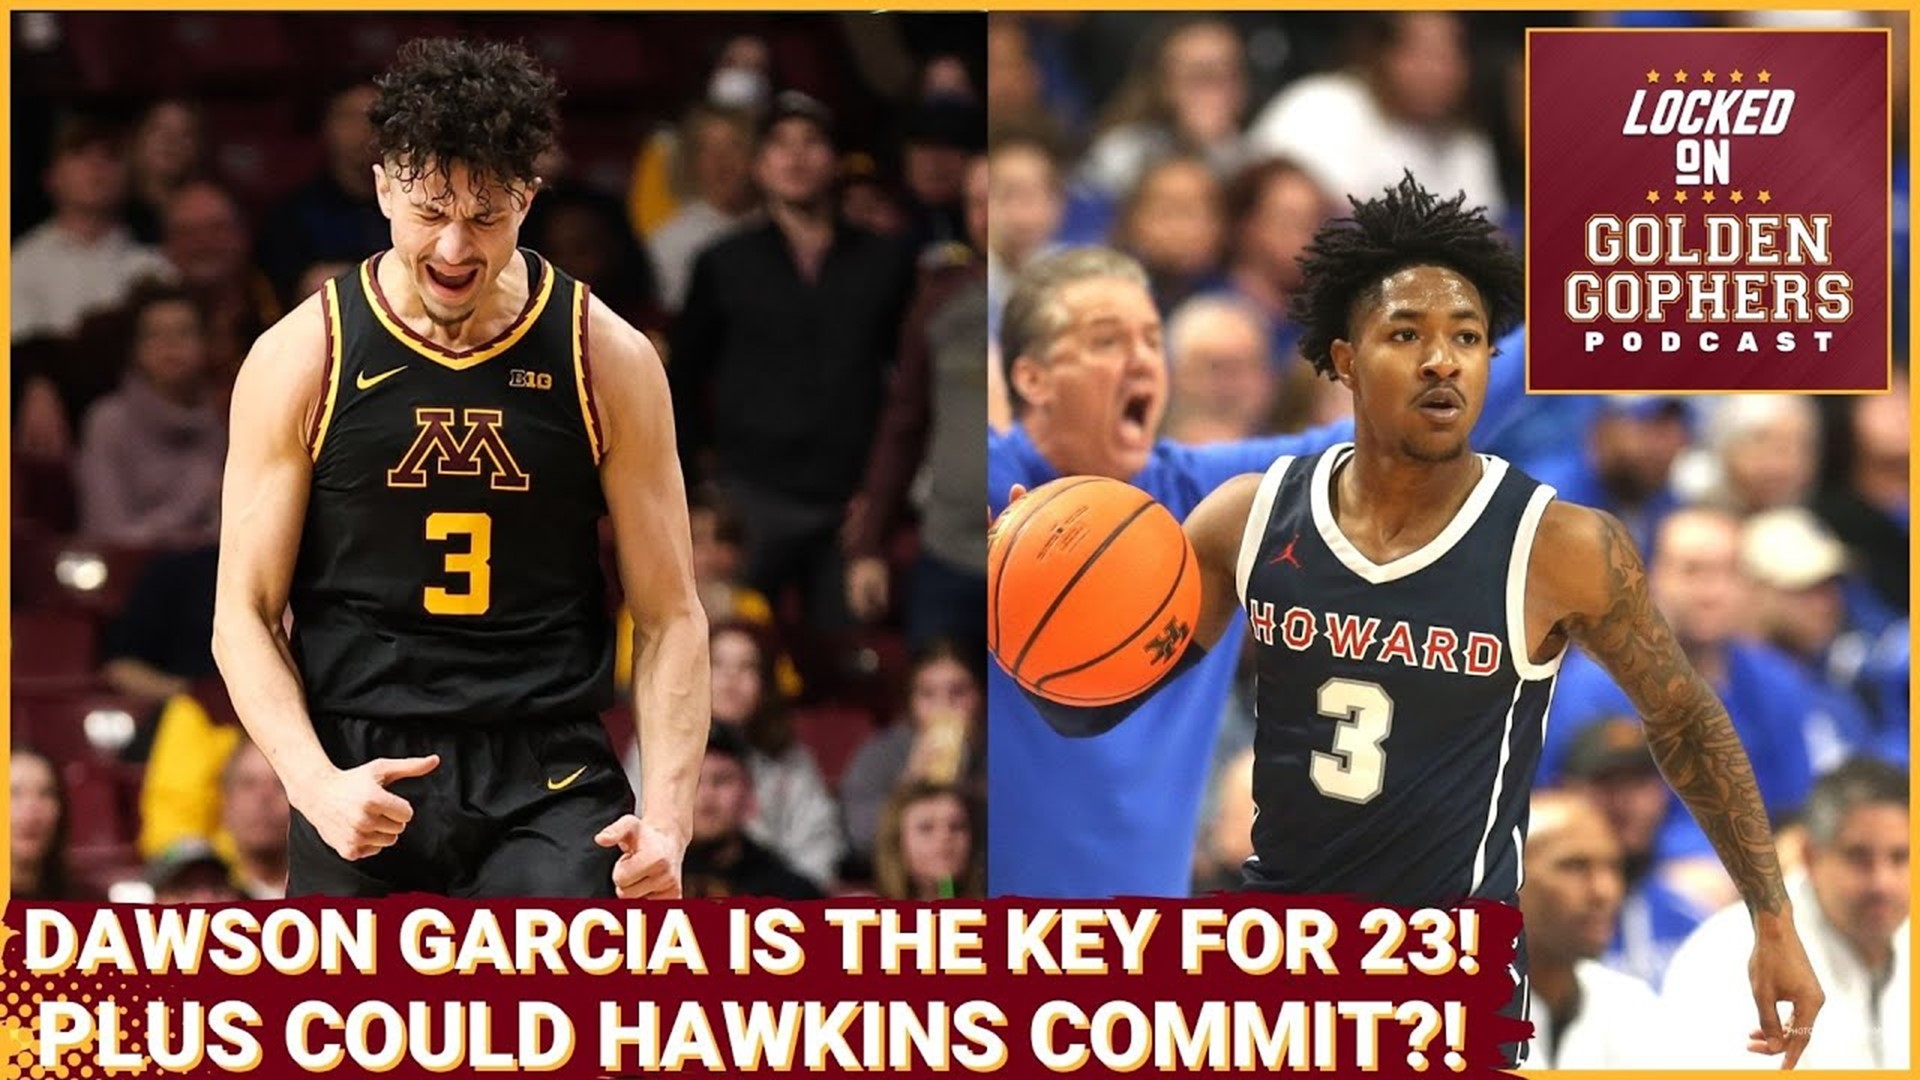 Today we discuss why Dawson Garcia is the key for Minnesota to take the next step in the Big Ten and get out of the bottom ranks.